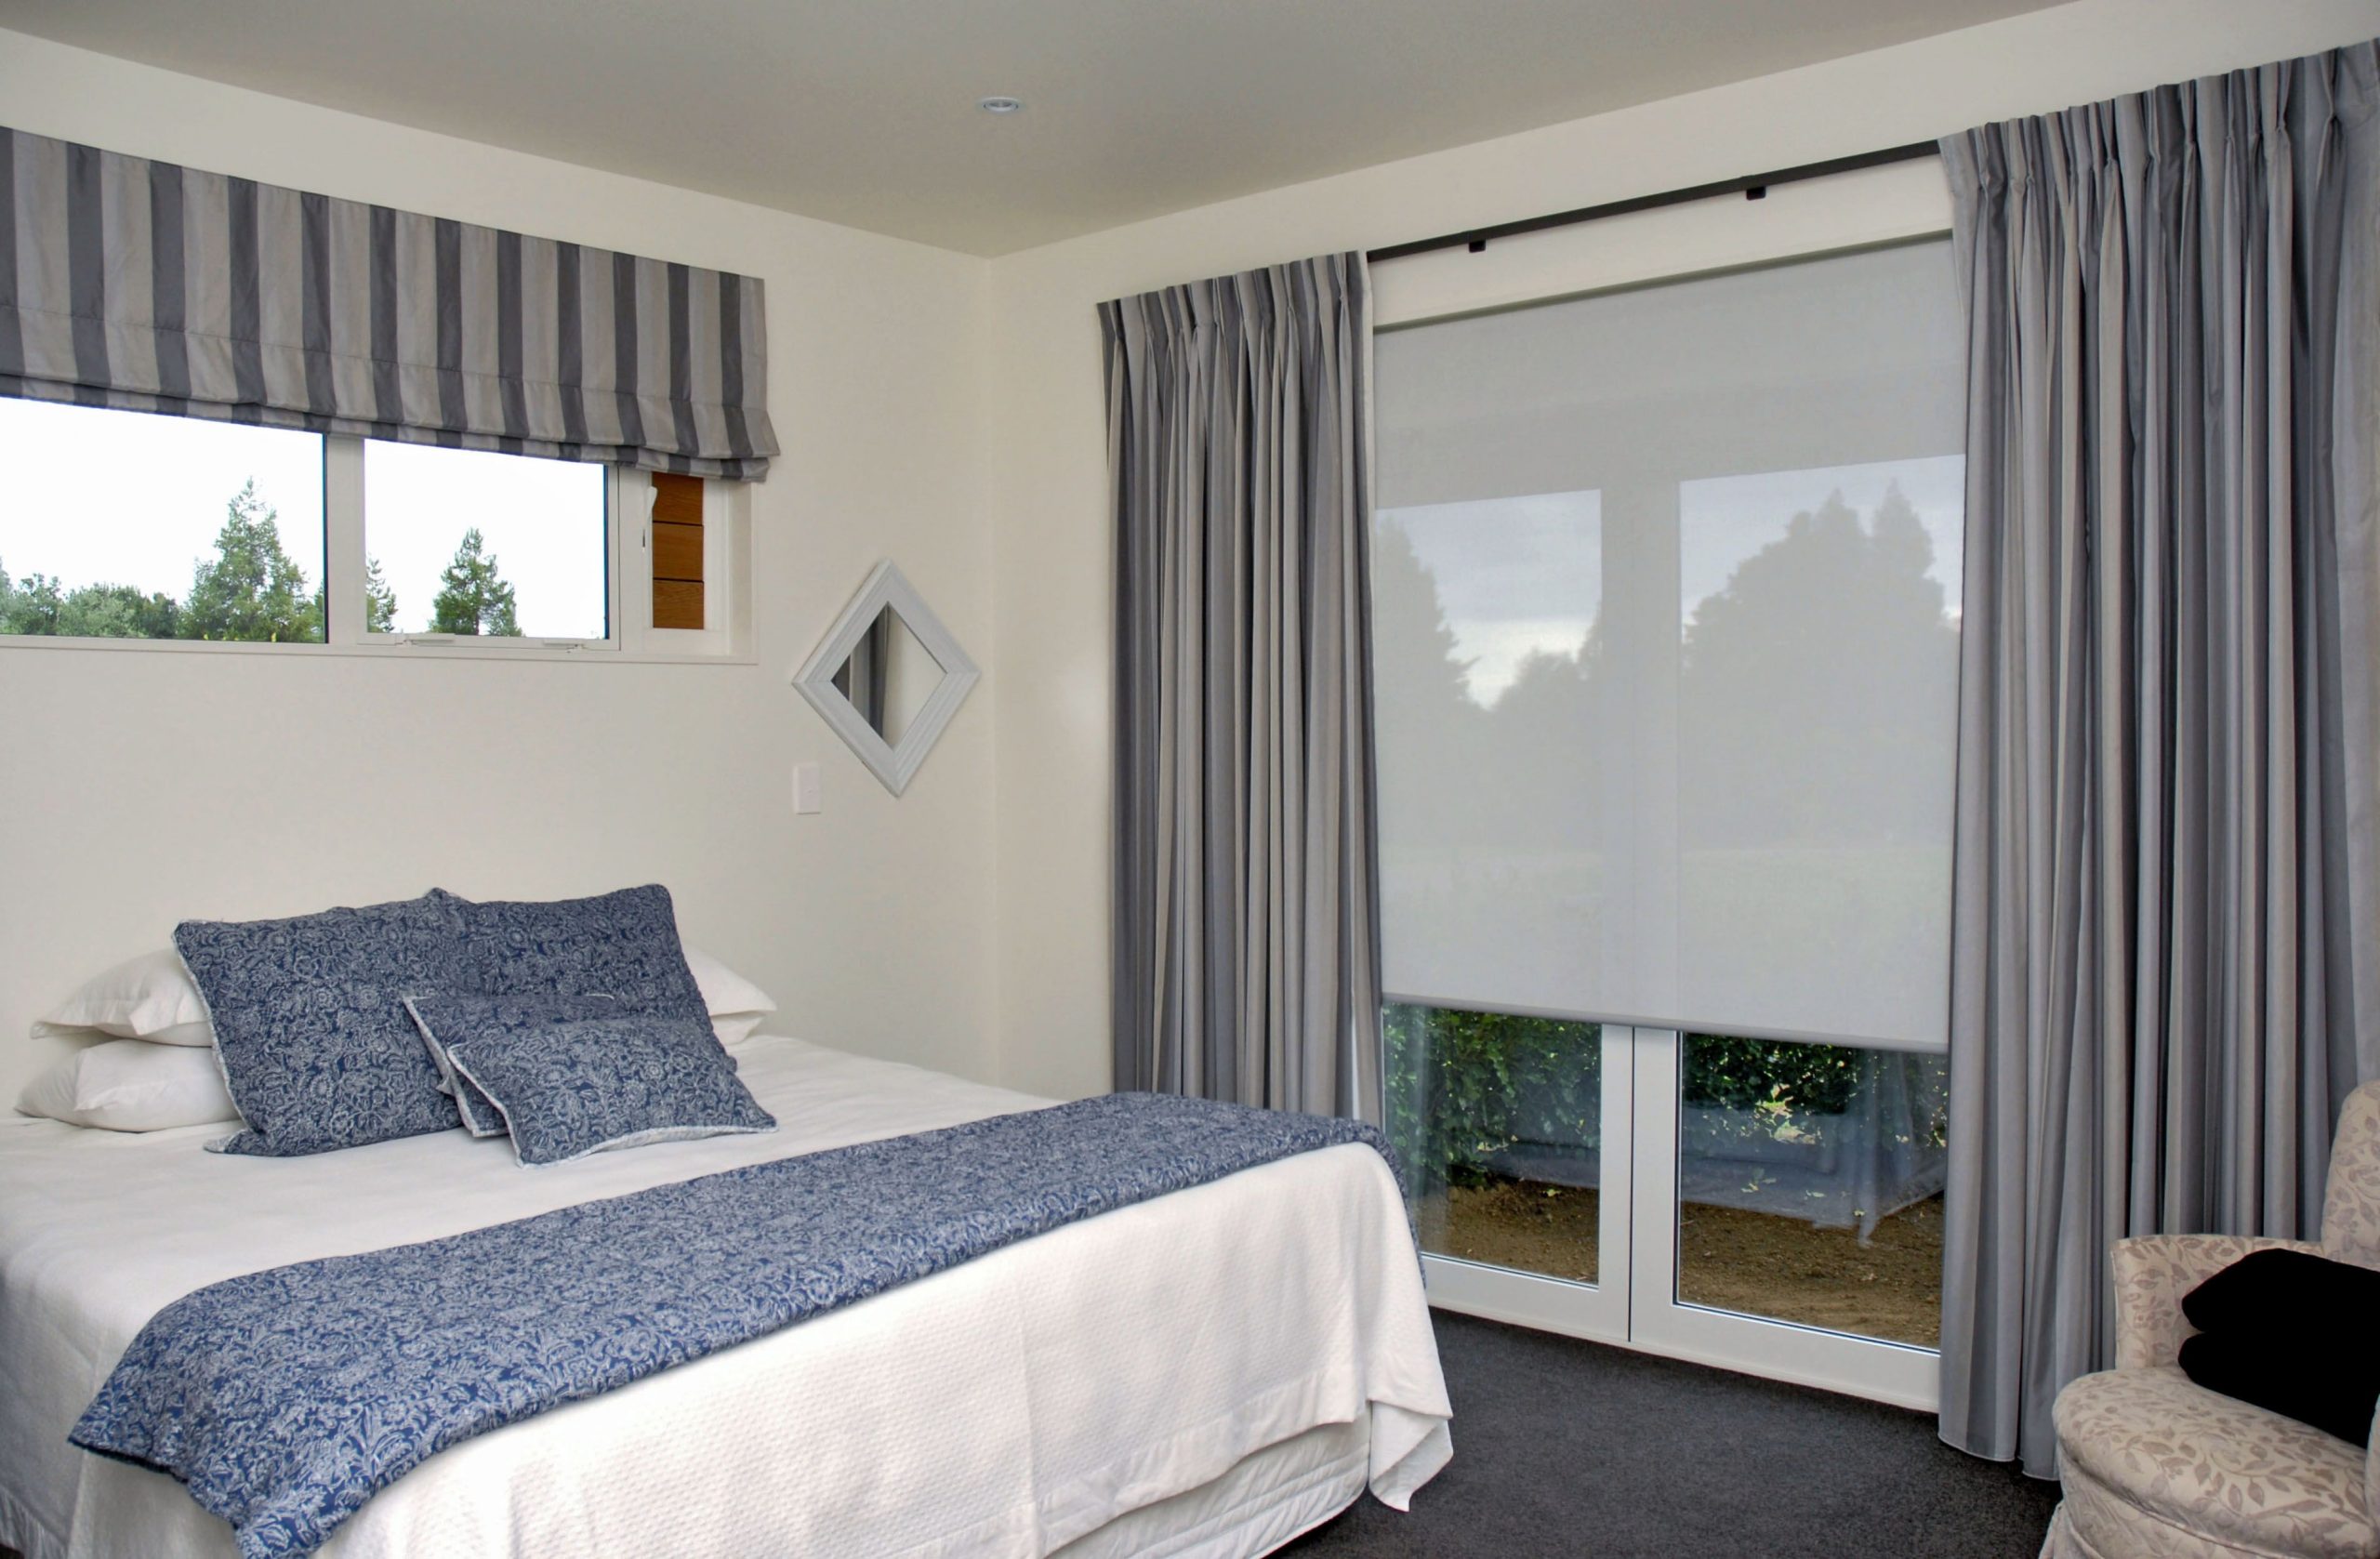 Best Curtains For Small Bedroom Window